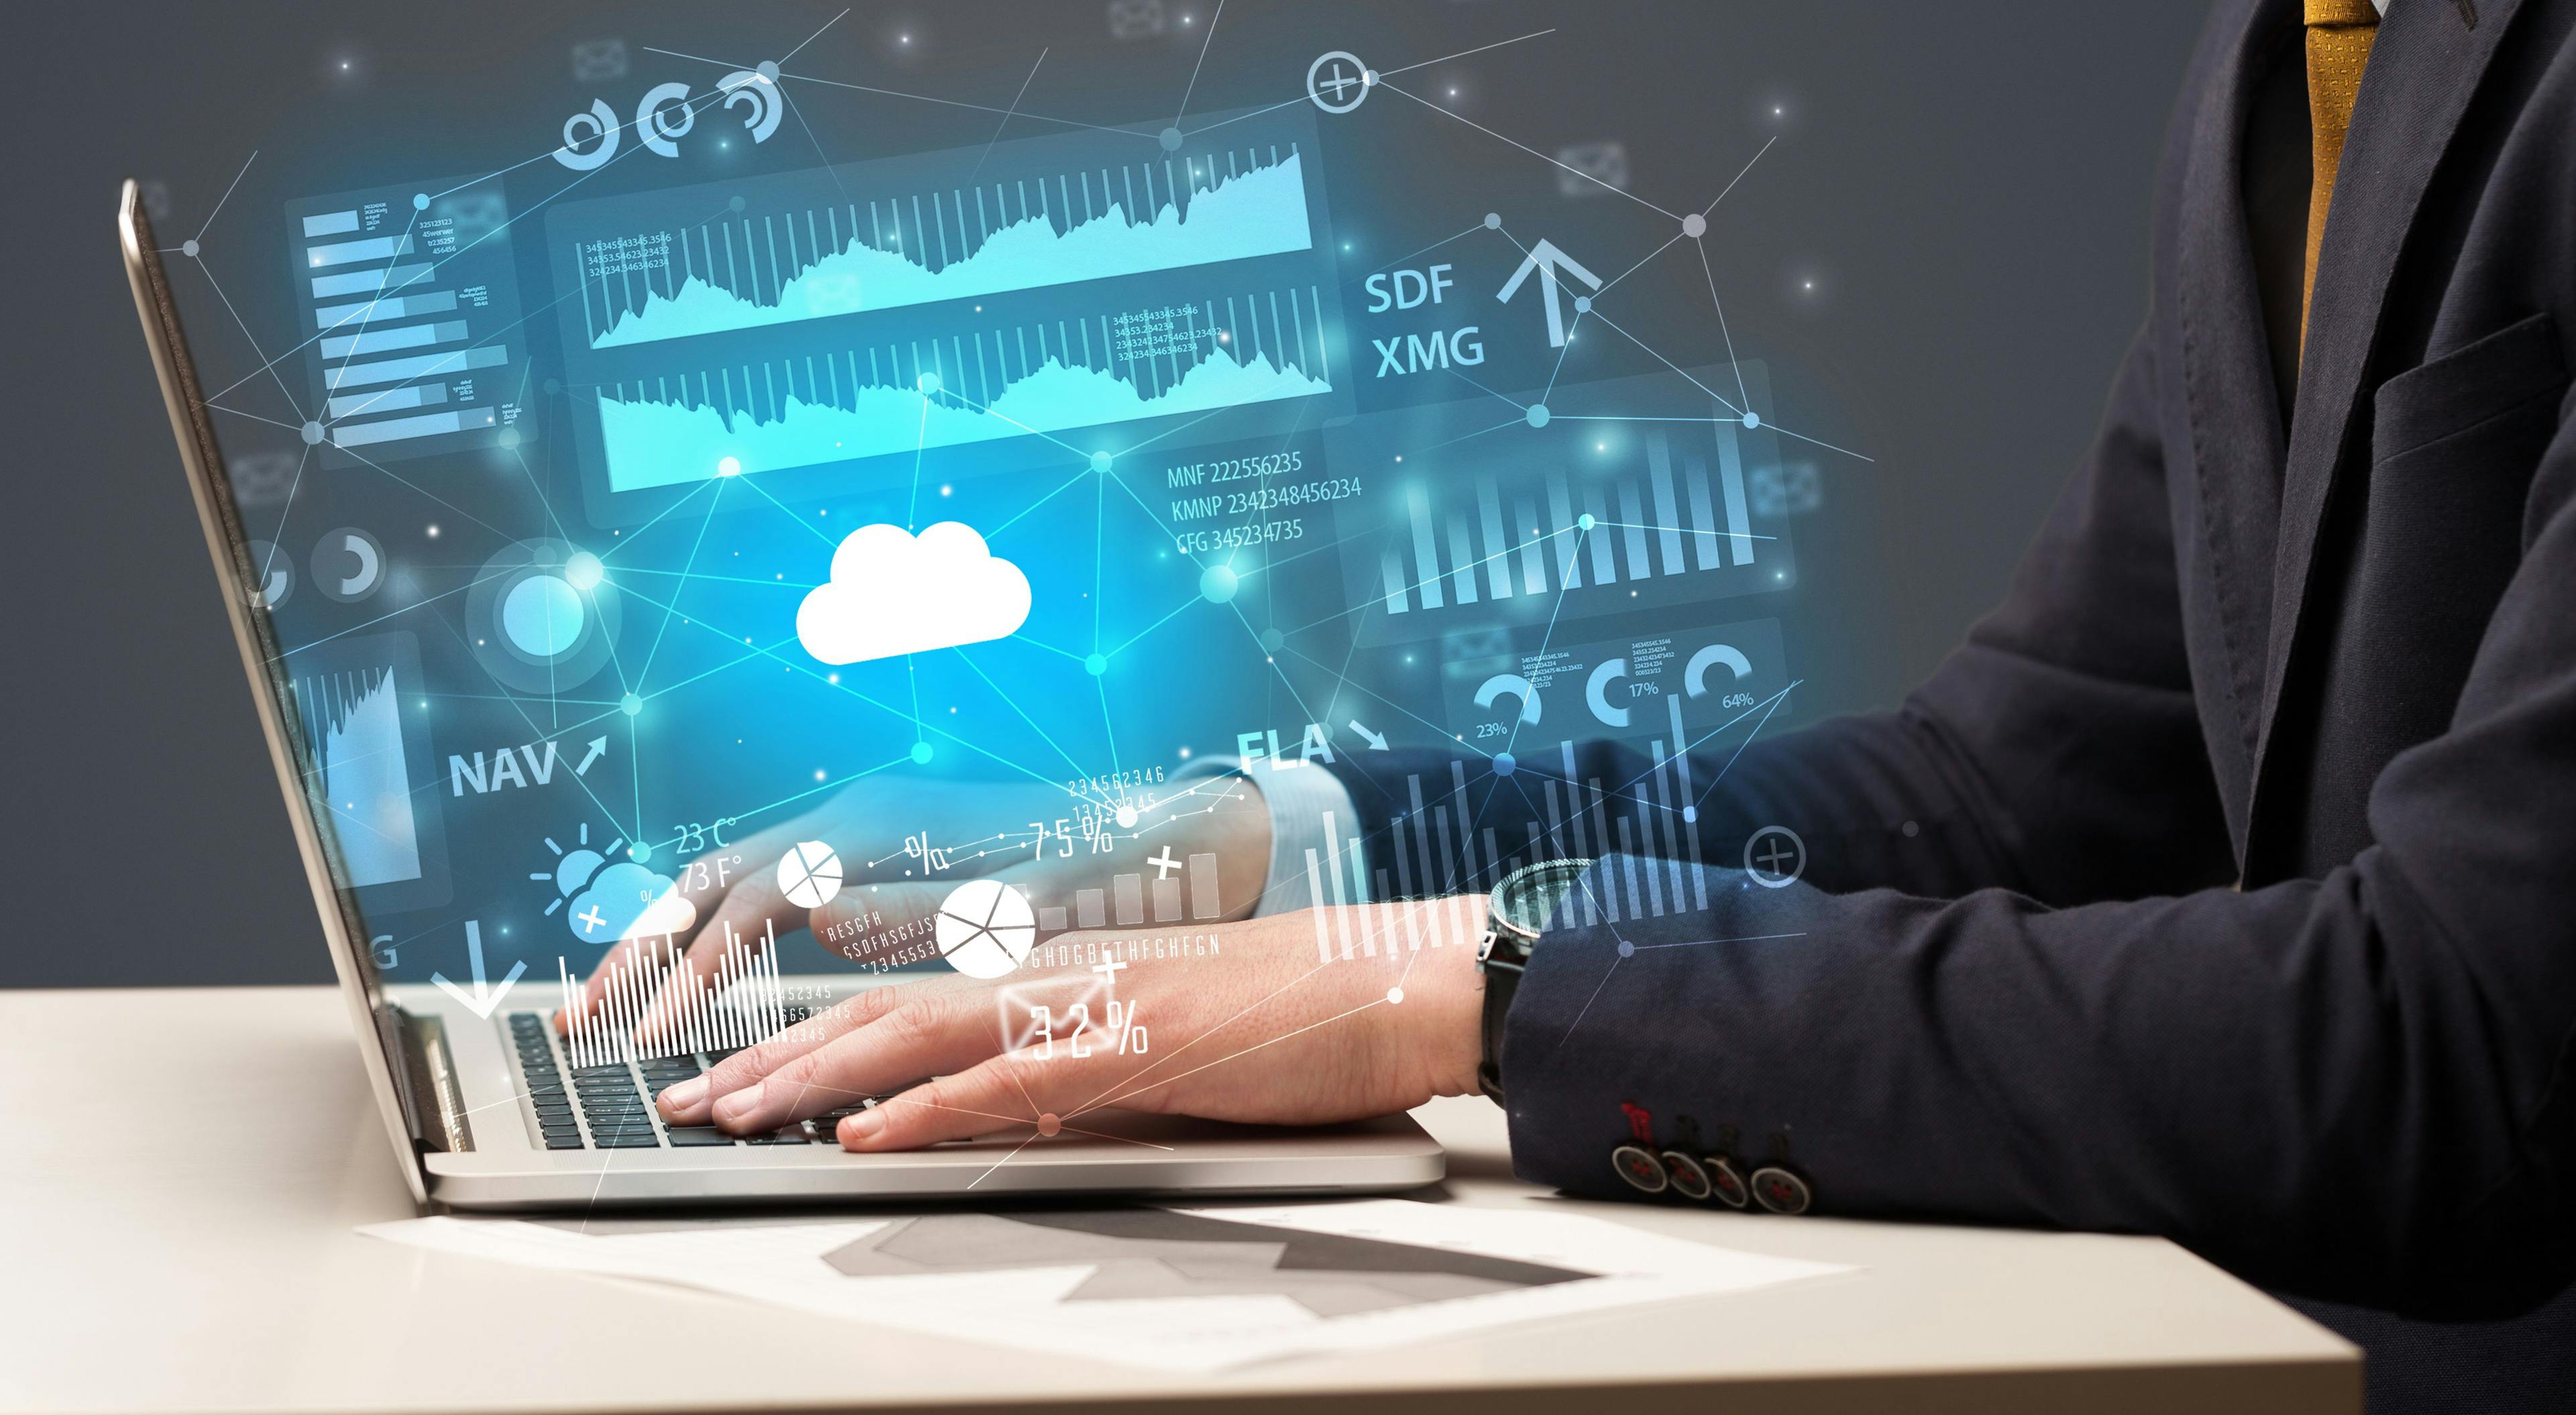 /why-small-businesses-should-move-to-cloud-accounting feature image